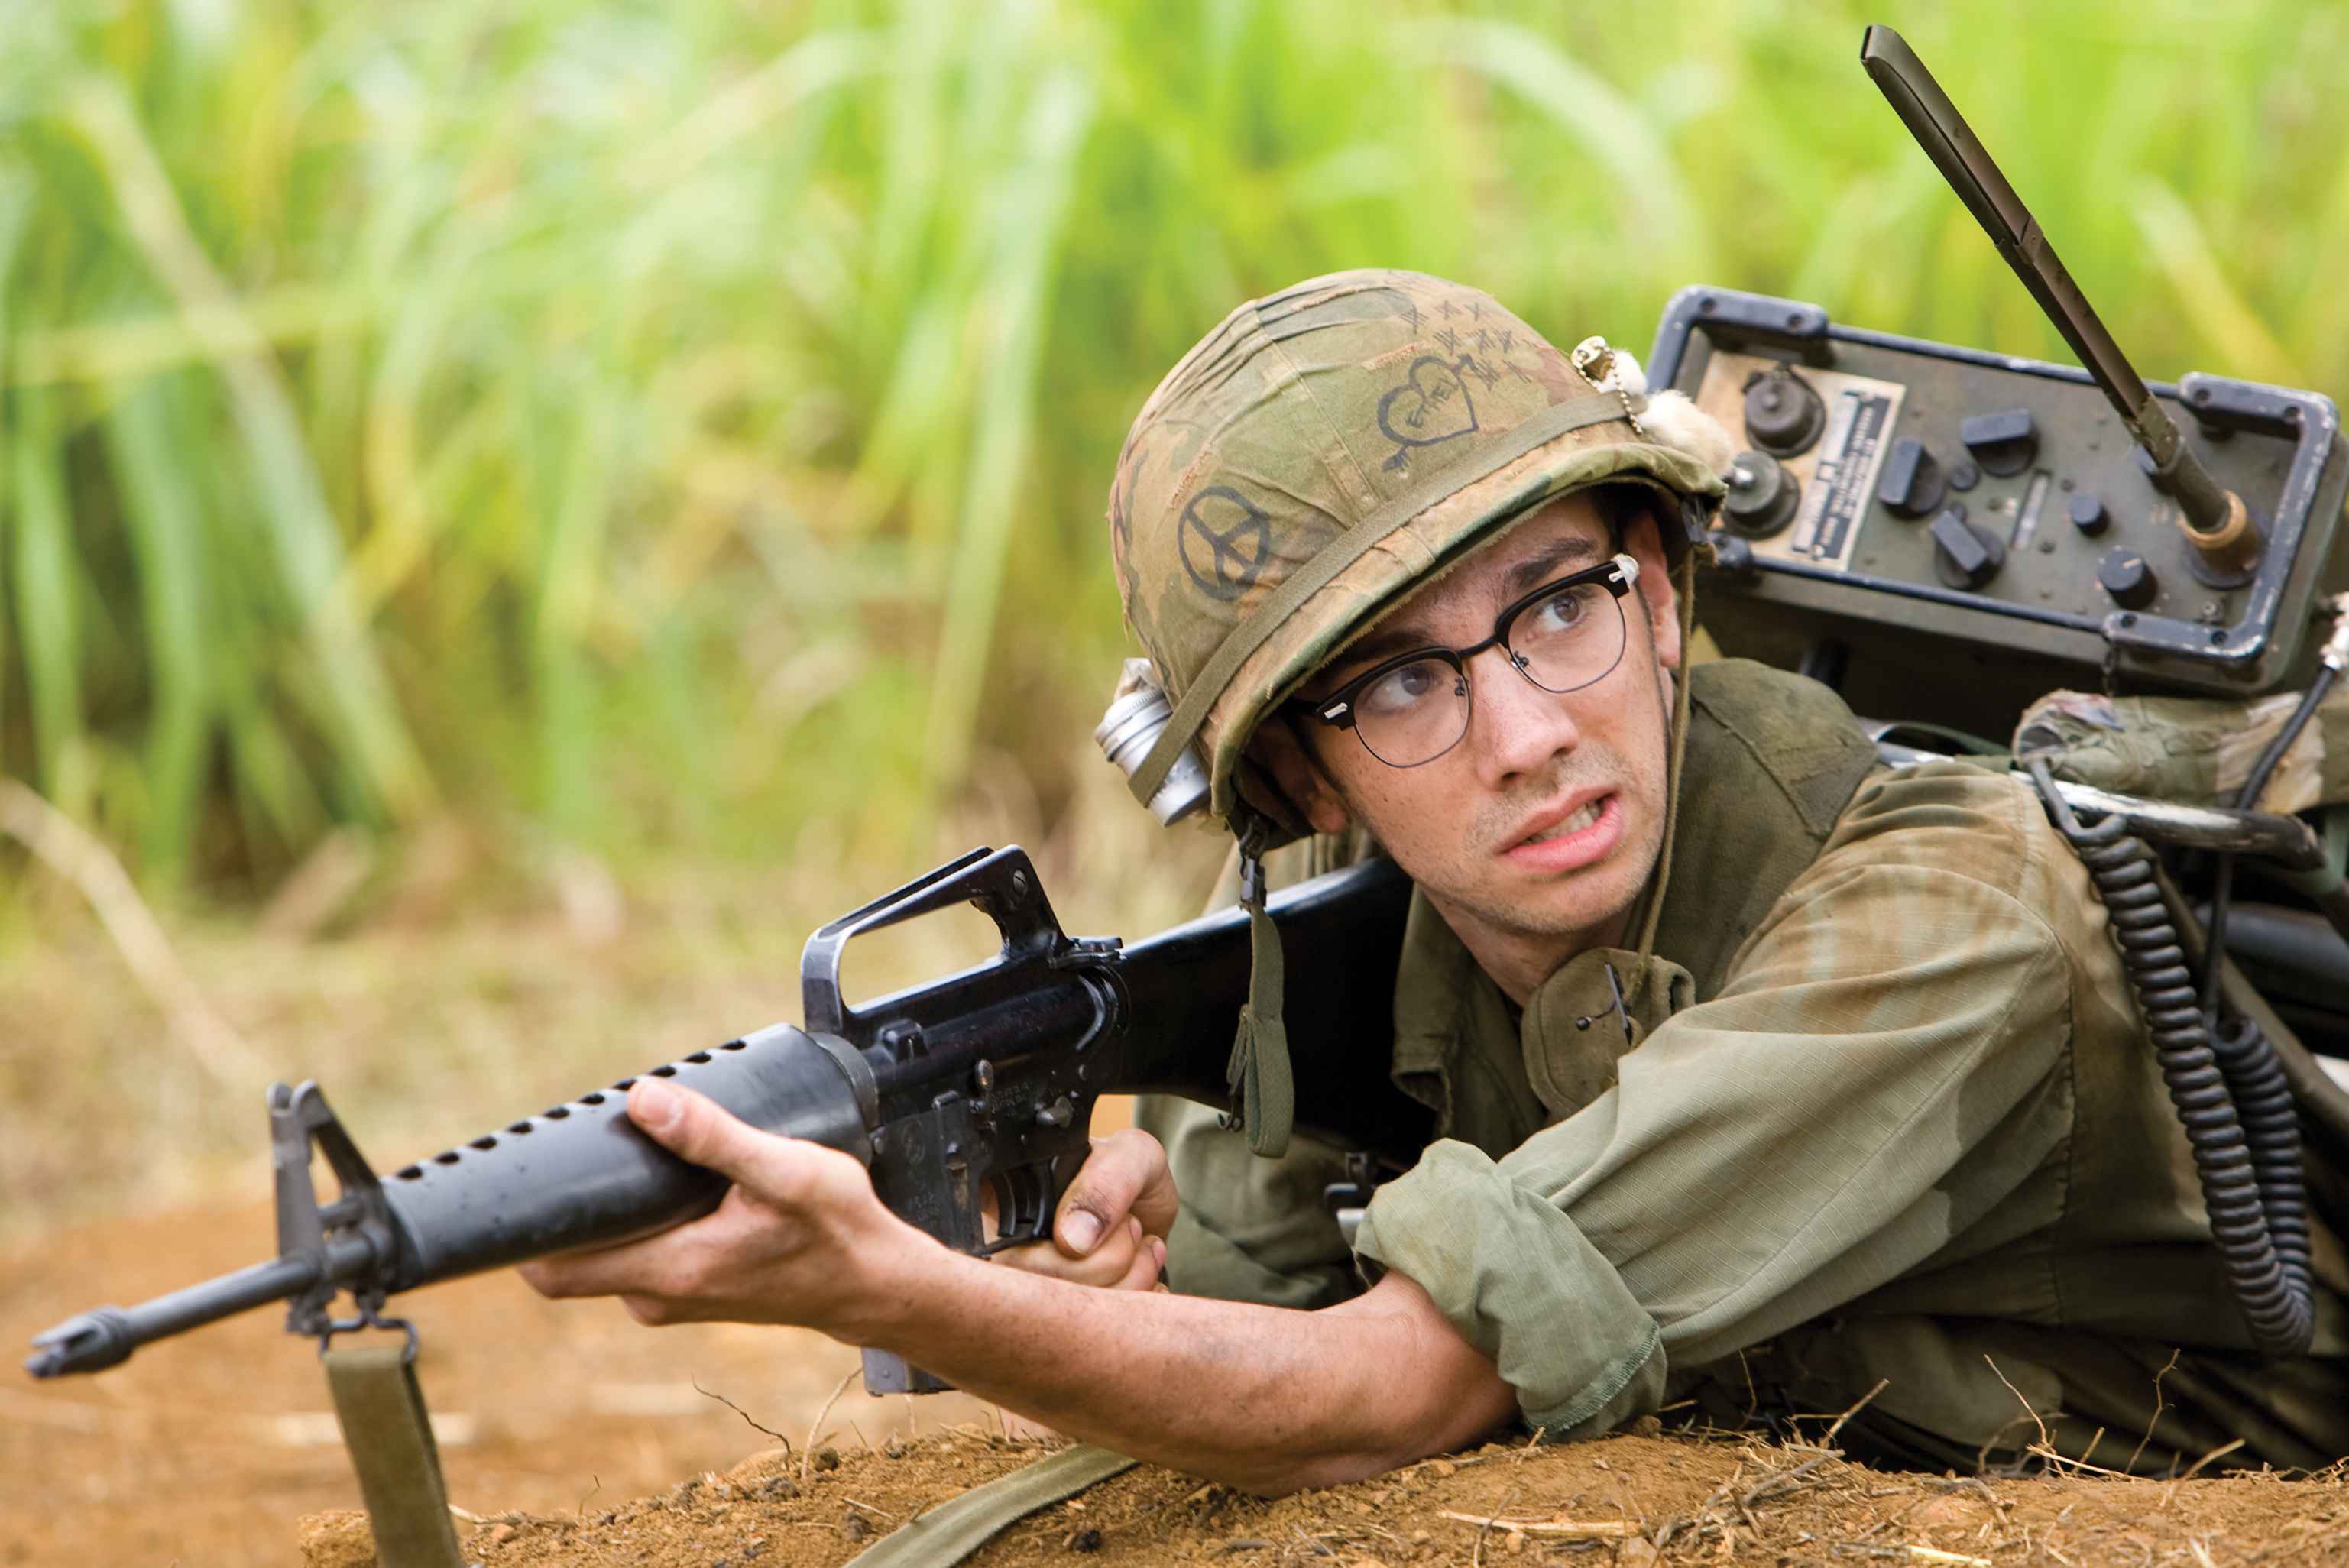 tropic, Thunder, Action, Comedy, Military, Weapon,  49 Wallpaper